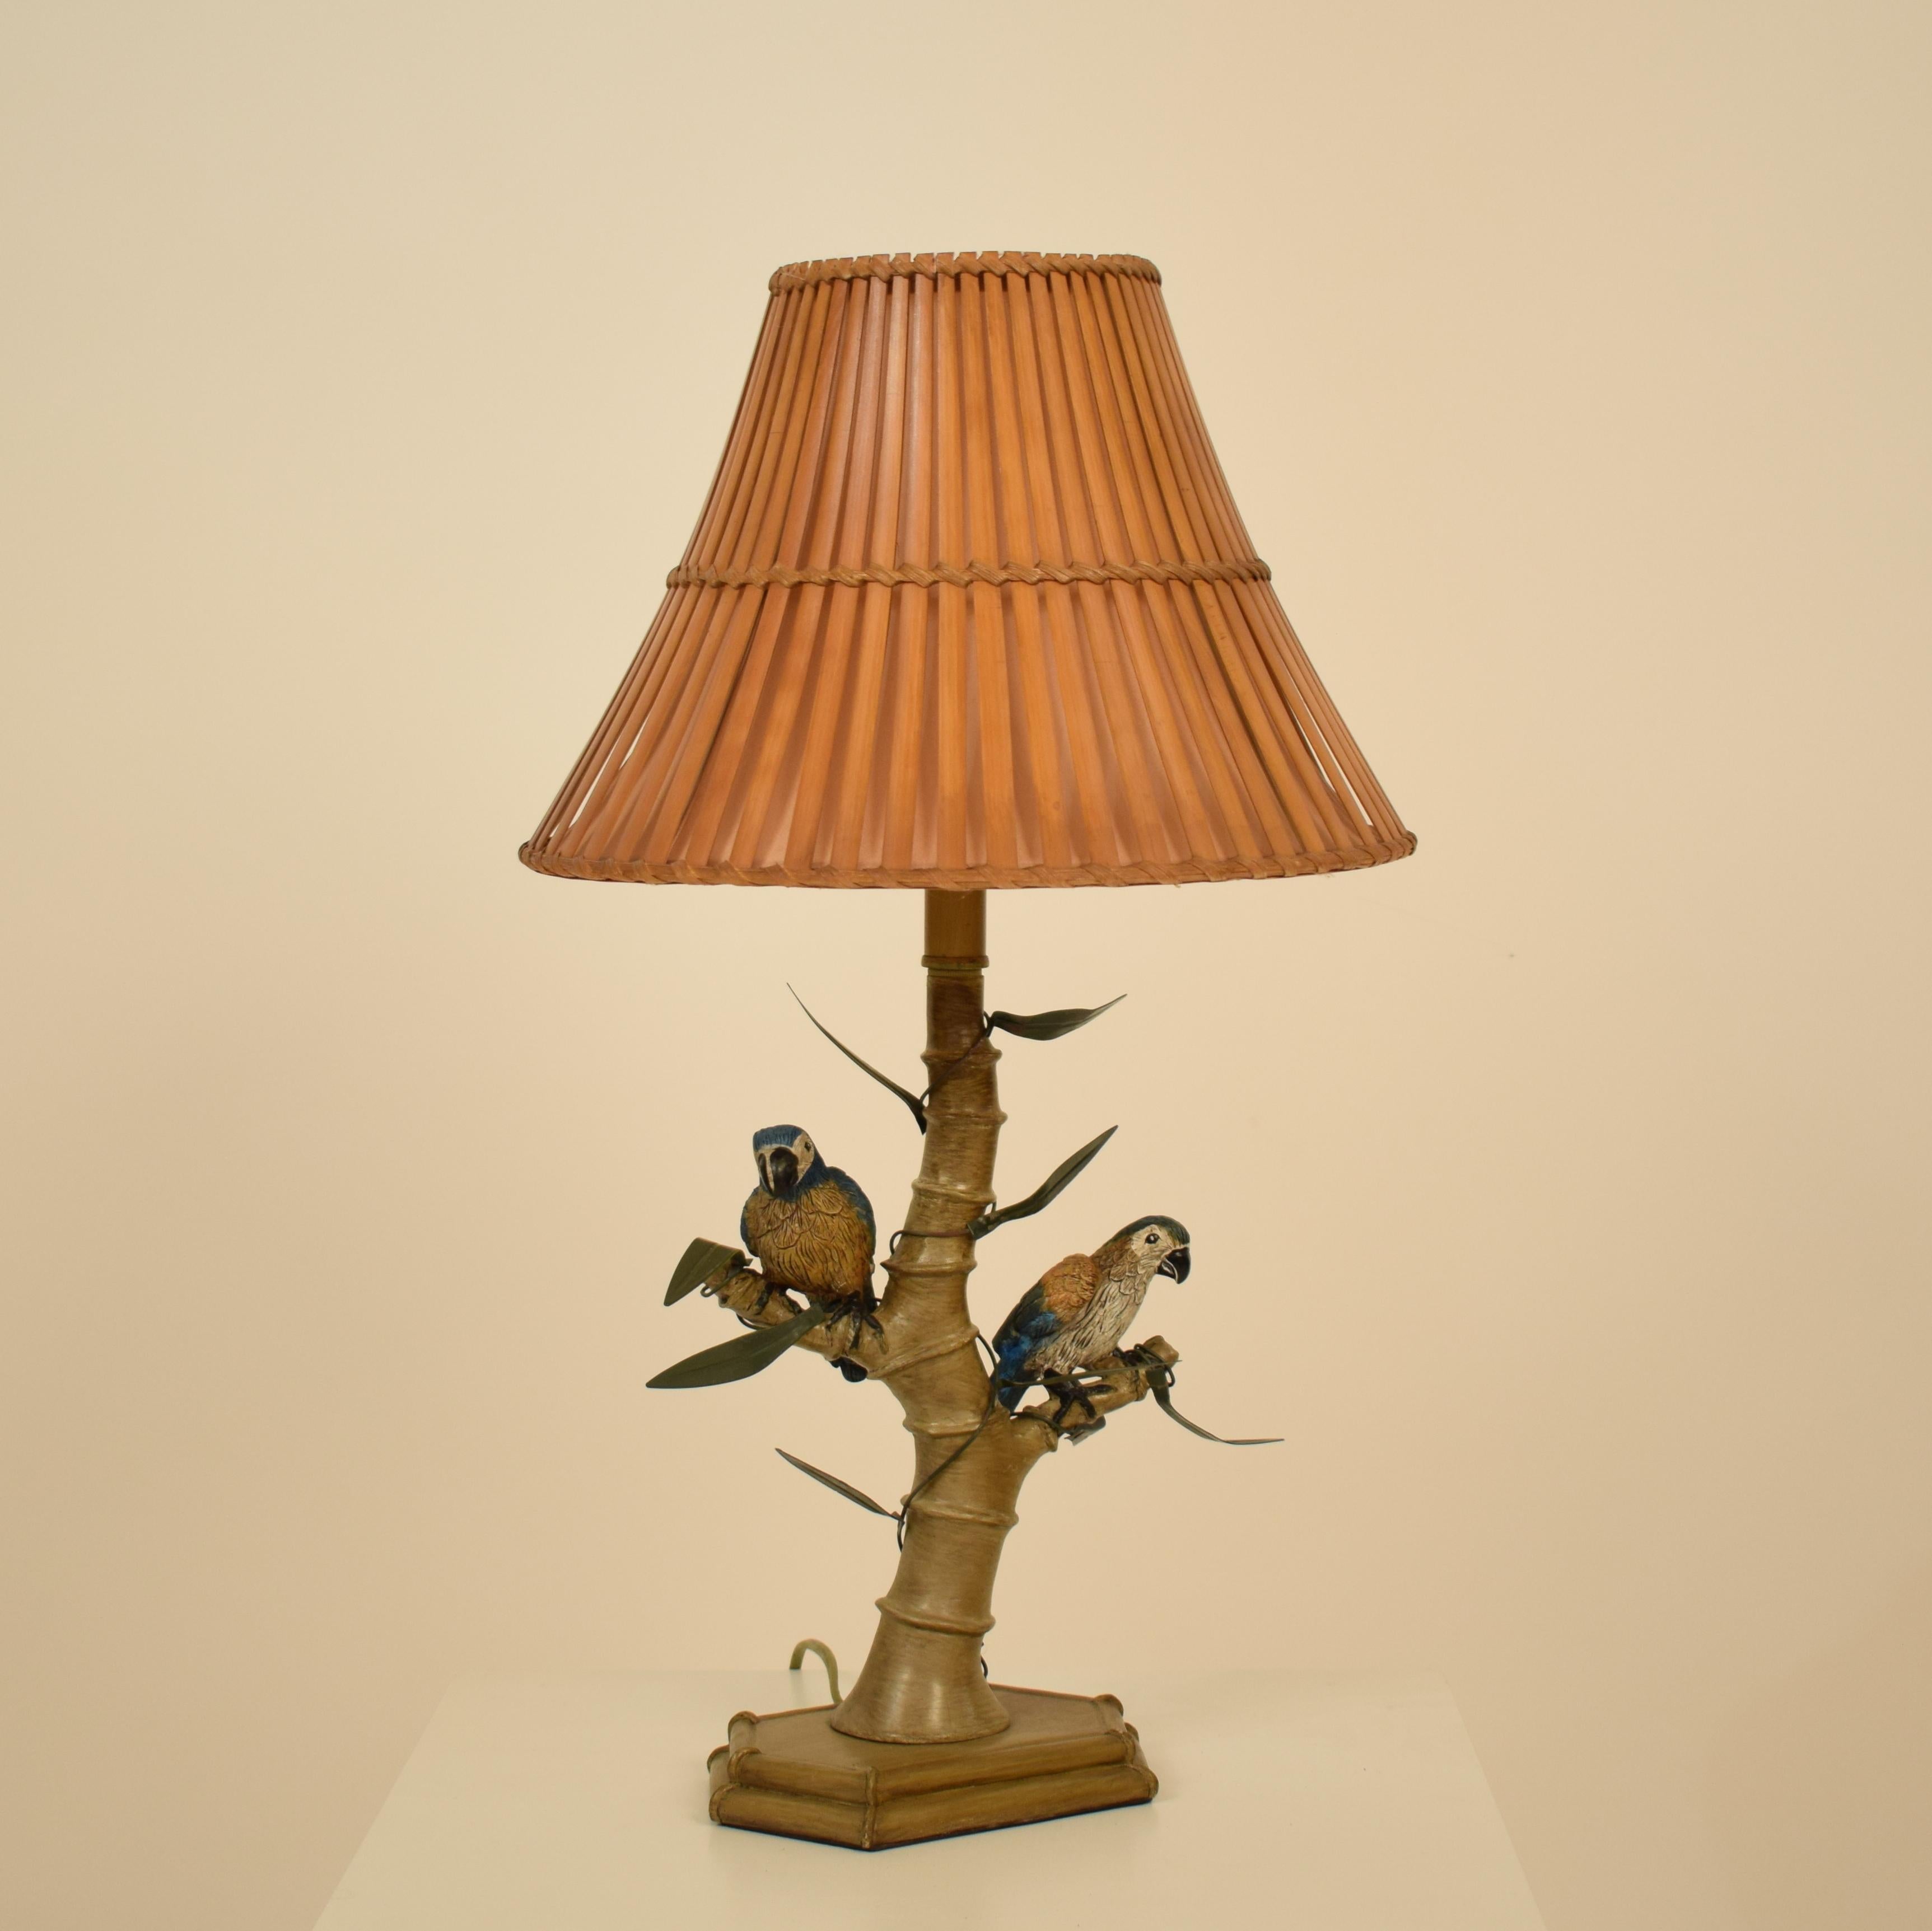 Brass Midcentury Italian Faux Bamboo Table Lamp with Parrots and Bamboo Lamp Shade